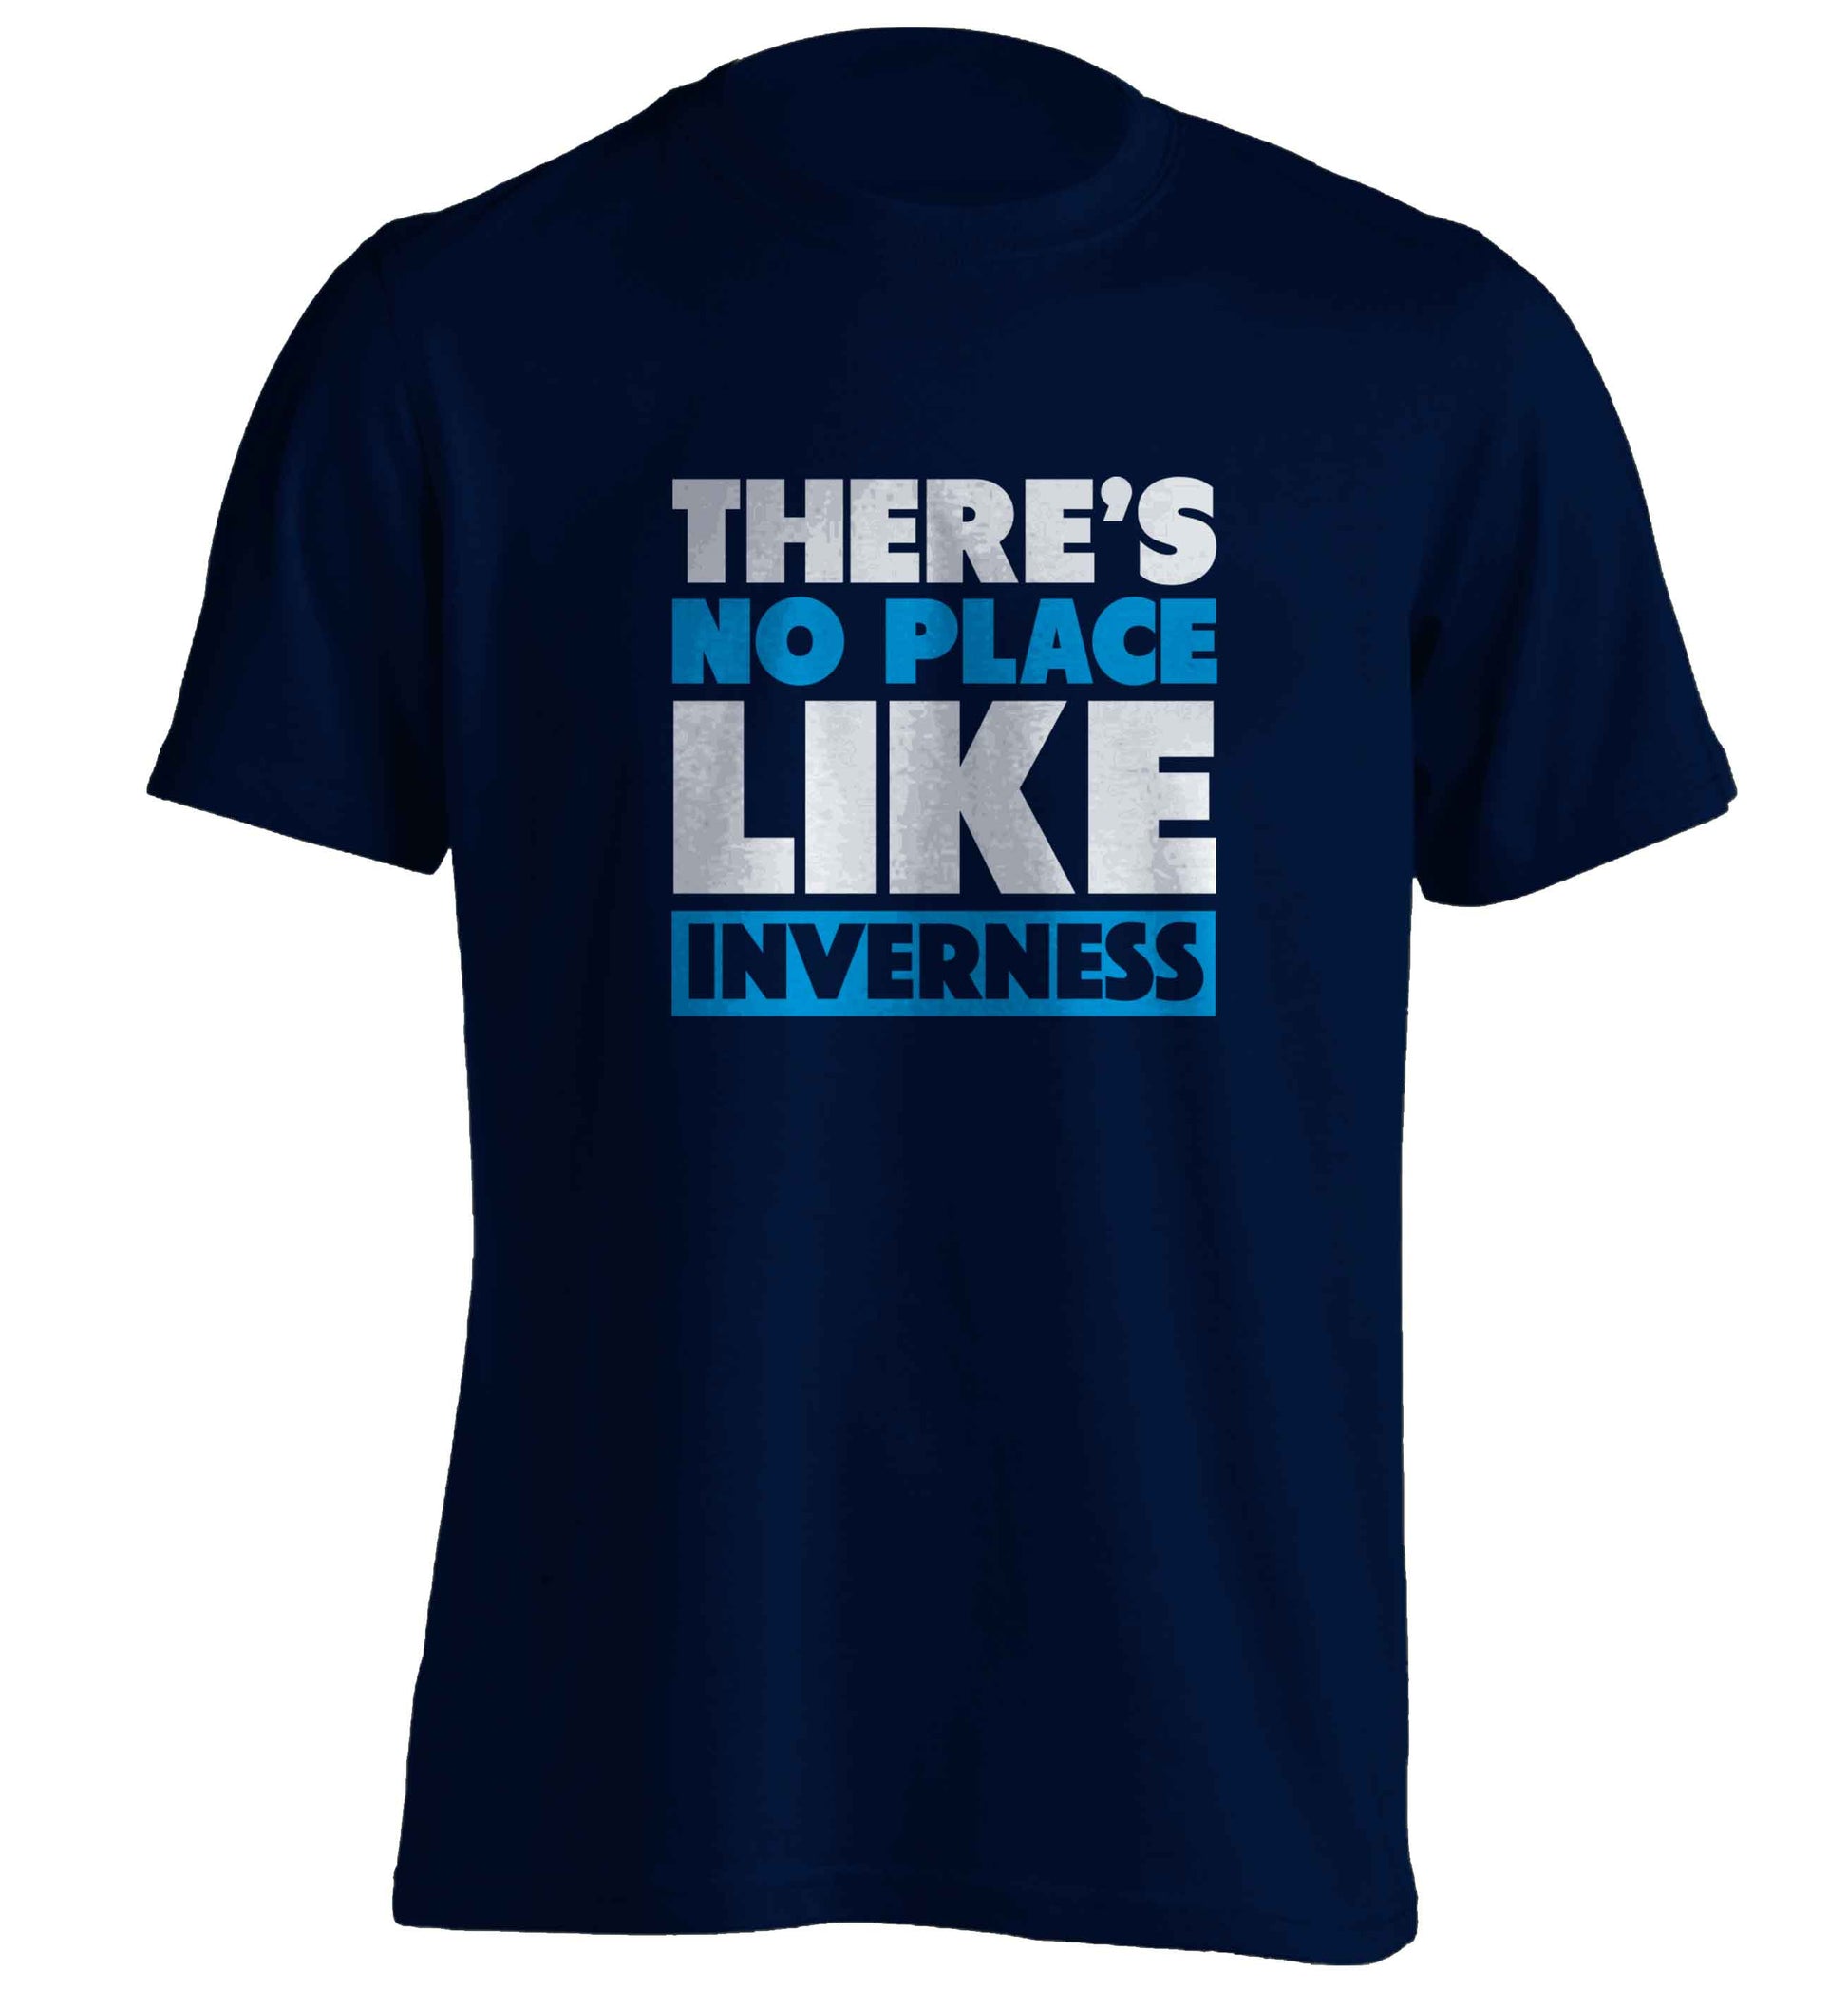 There's no place like Inverness adults unisex navy Tshirt 2XL